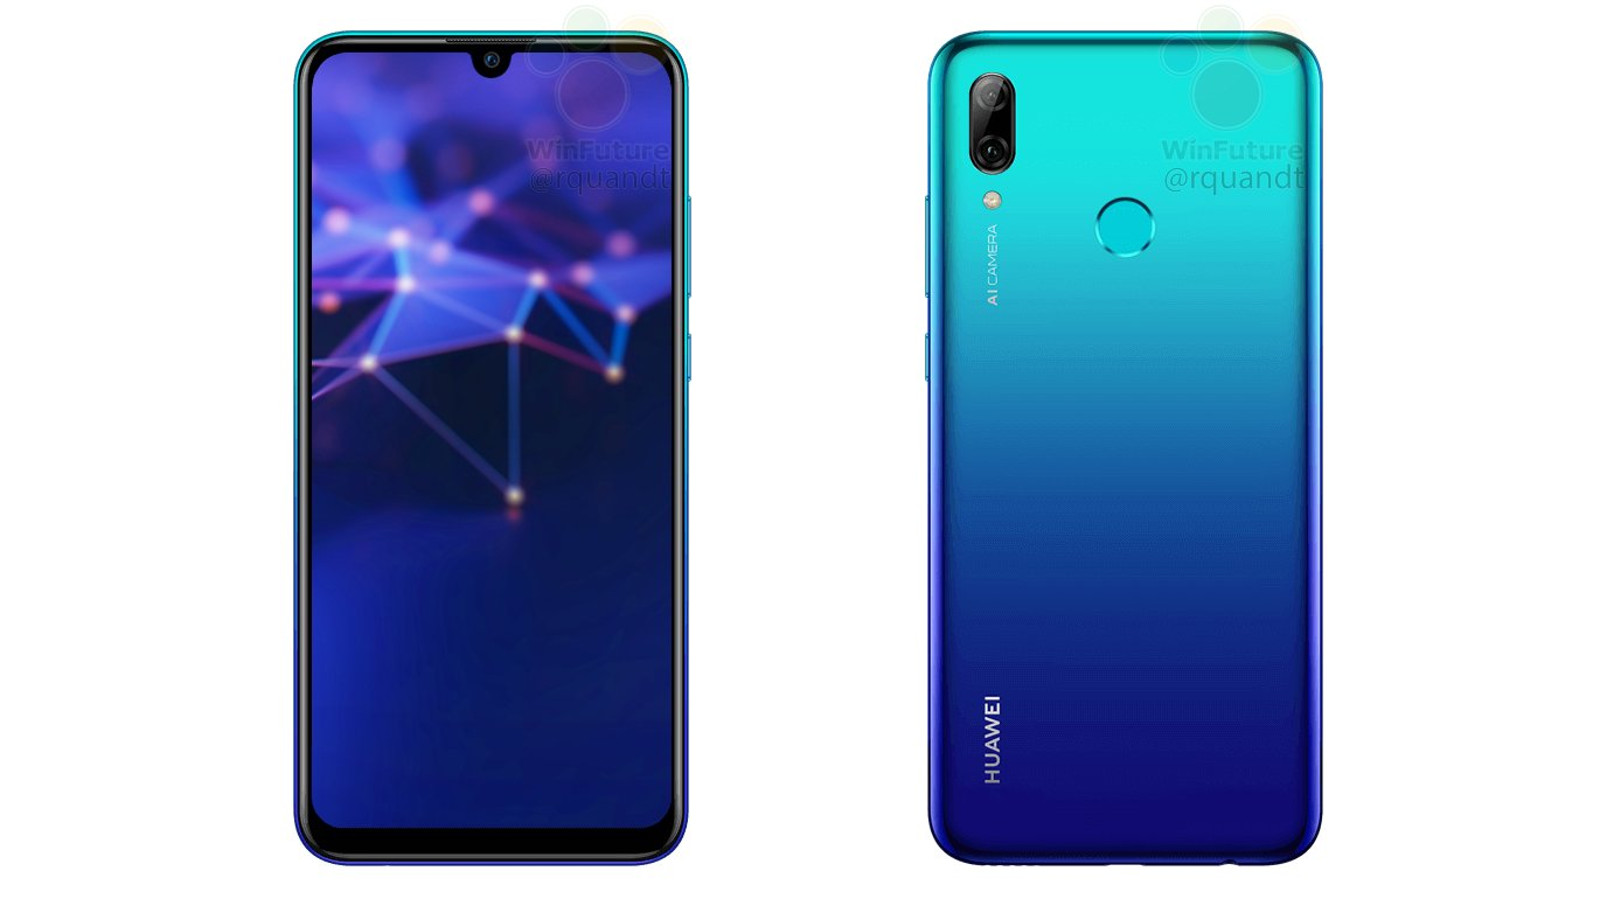 An image supposedly showing the Huawei P Smart 2019.